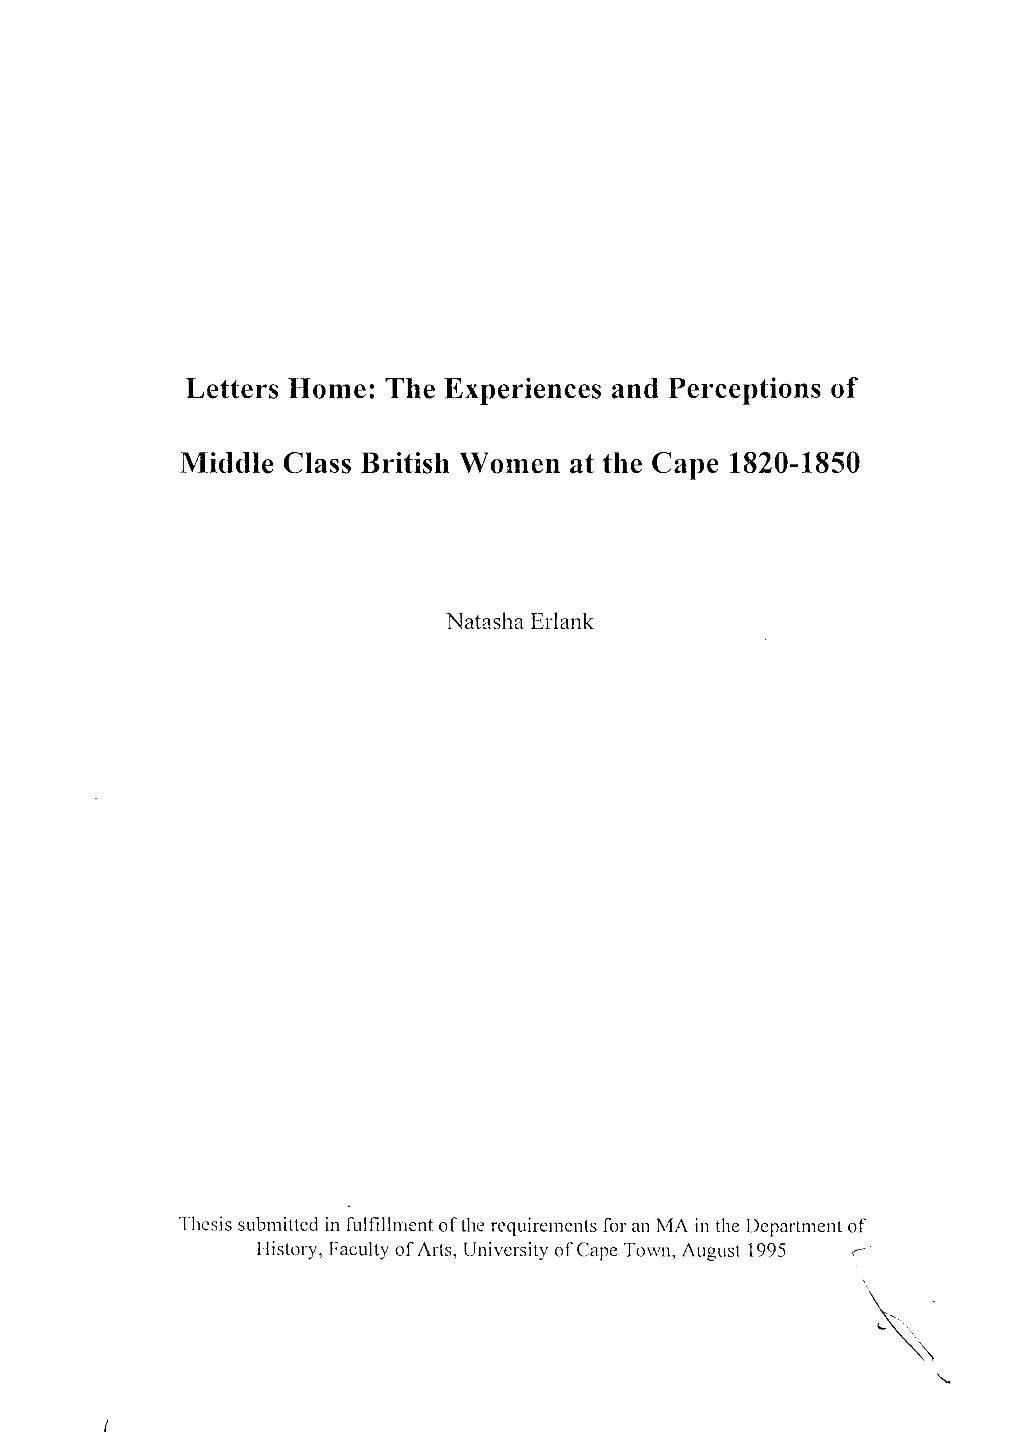 The Experiences and Perceptions of Middle Class British Women at The